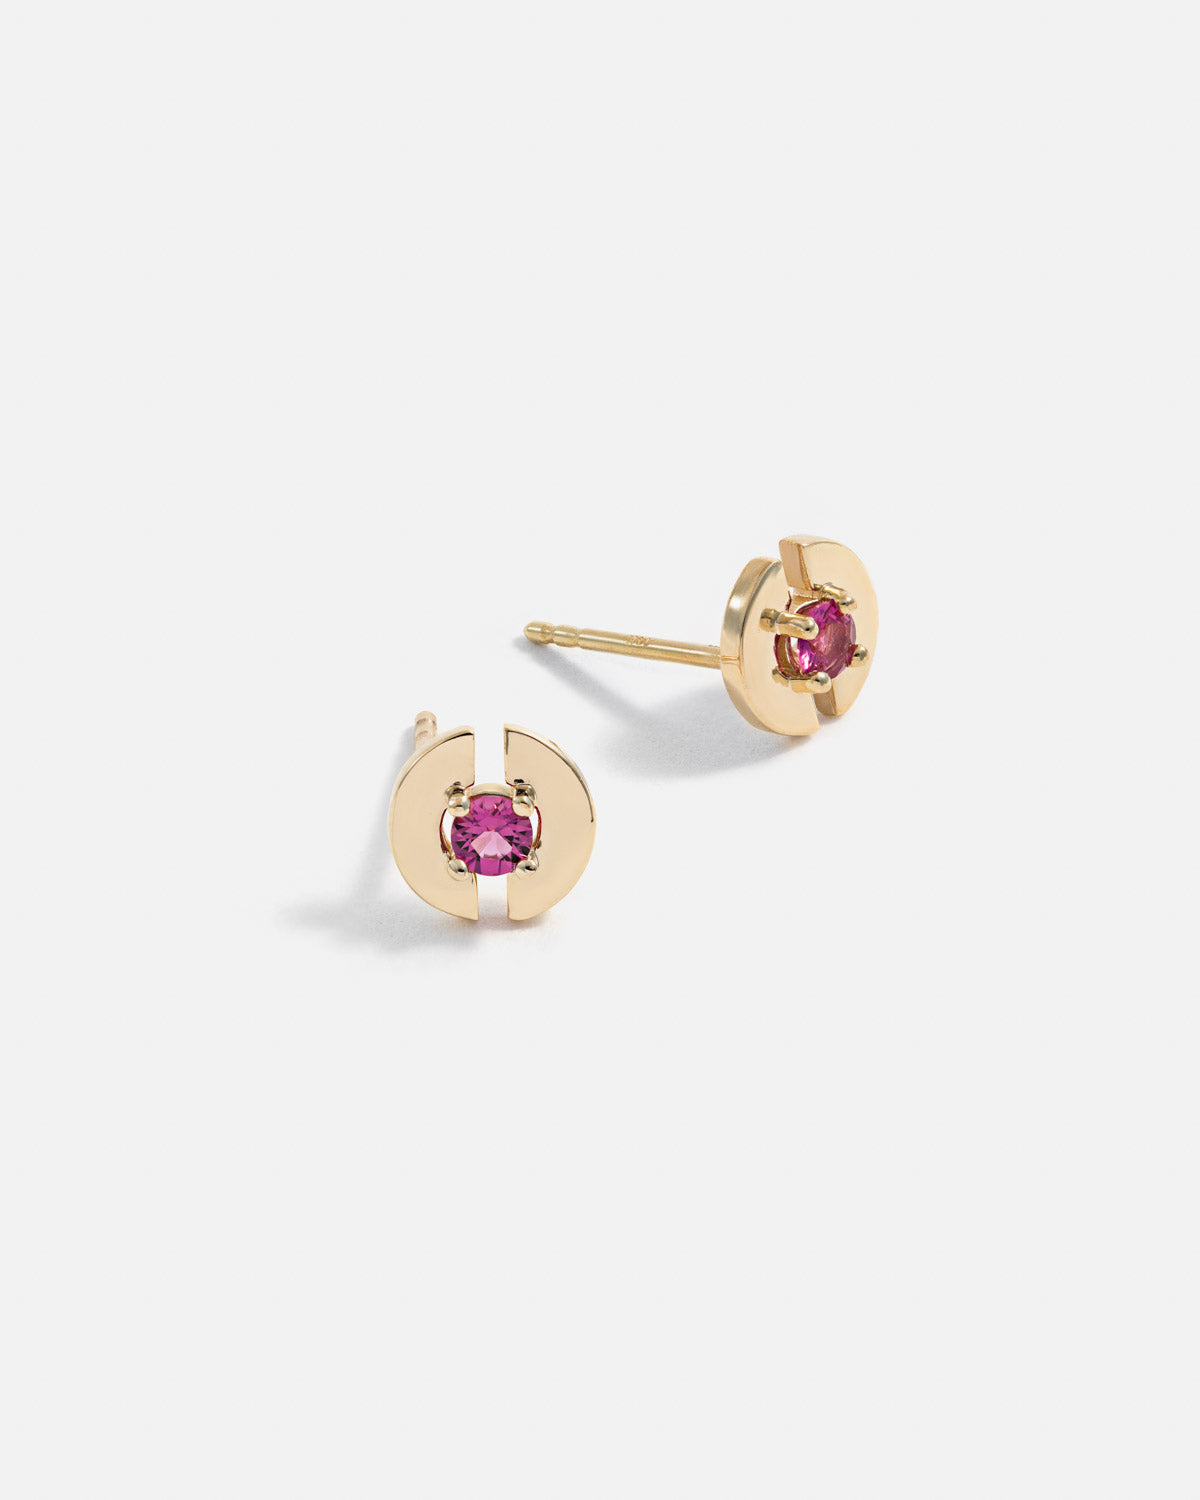 Stein Stud Earrings in Yellow Gold with Pink Tourmaline